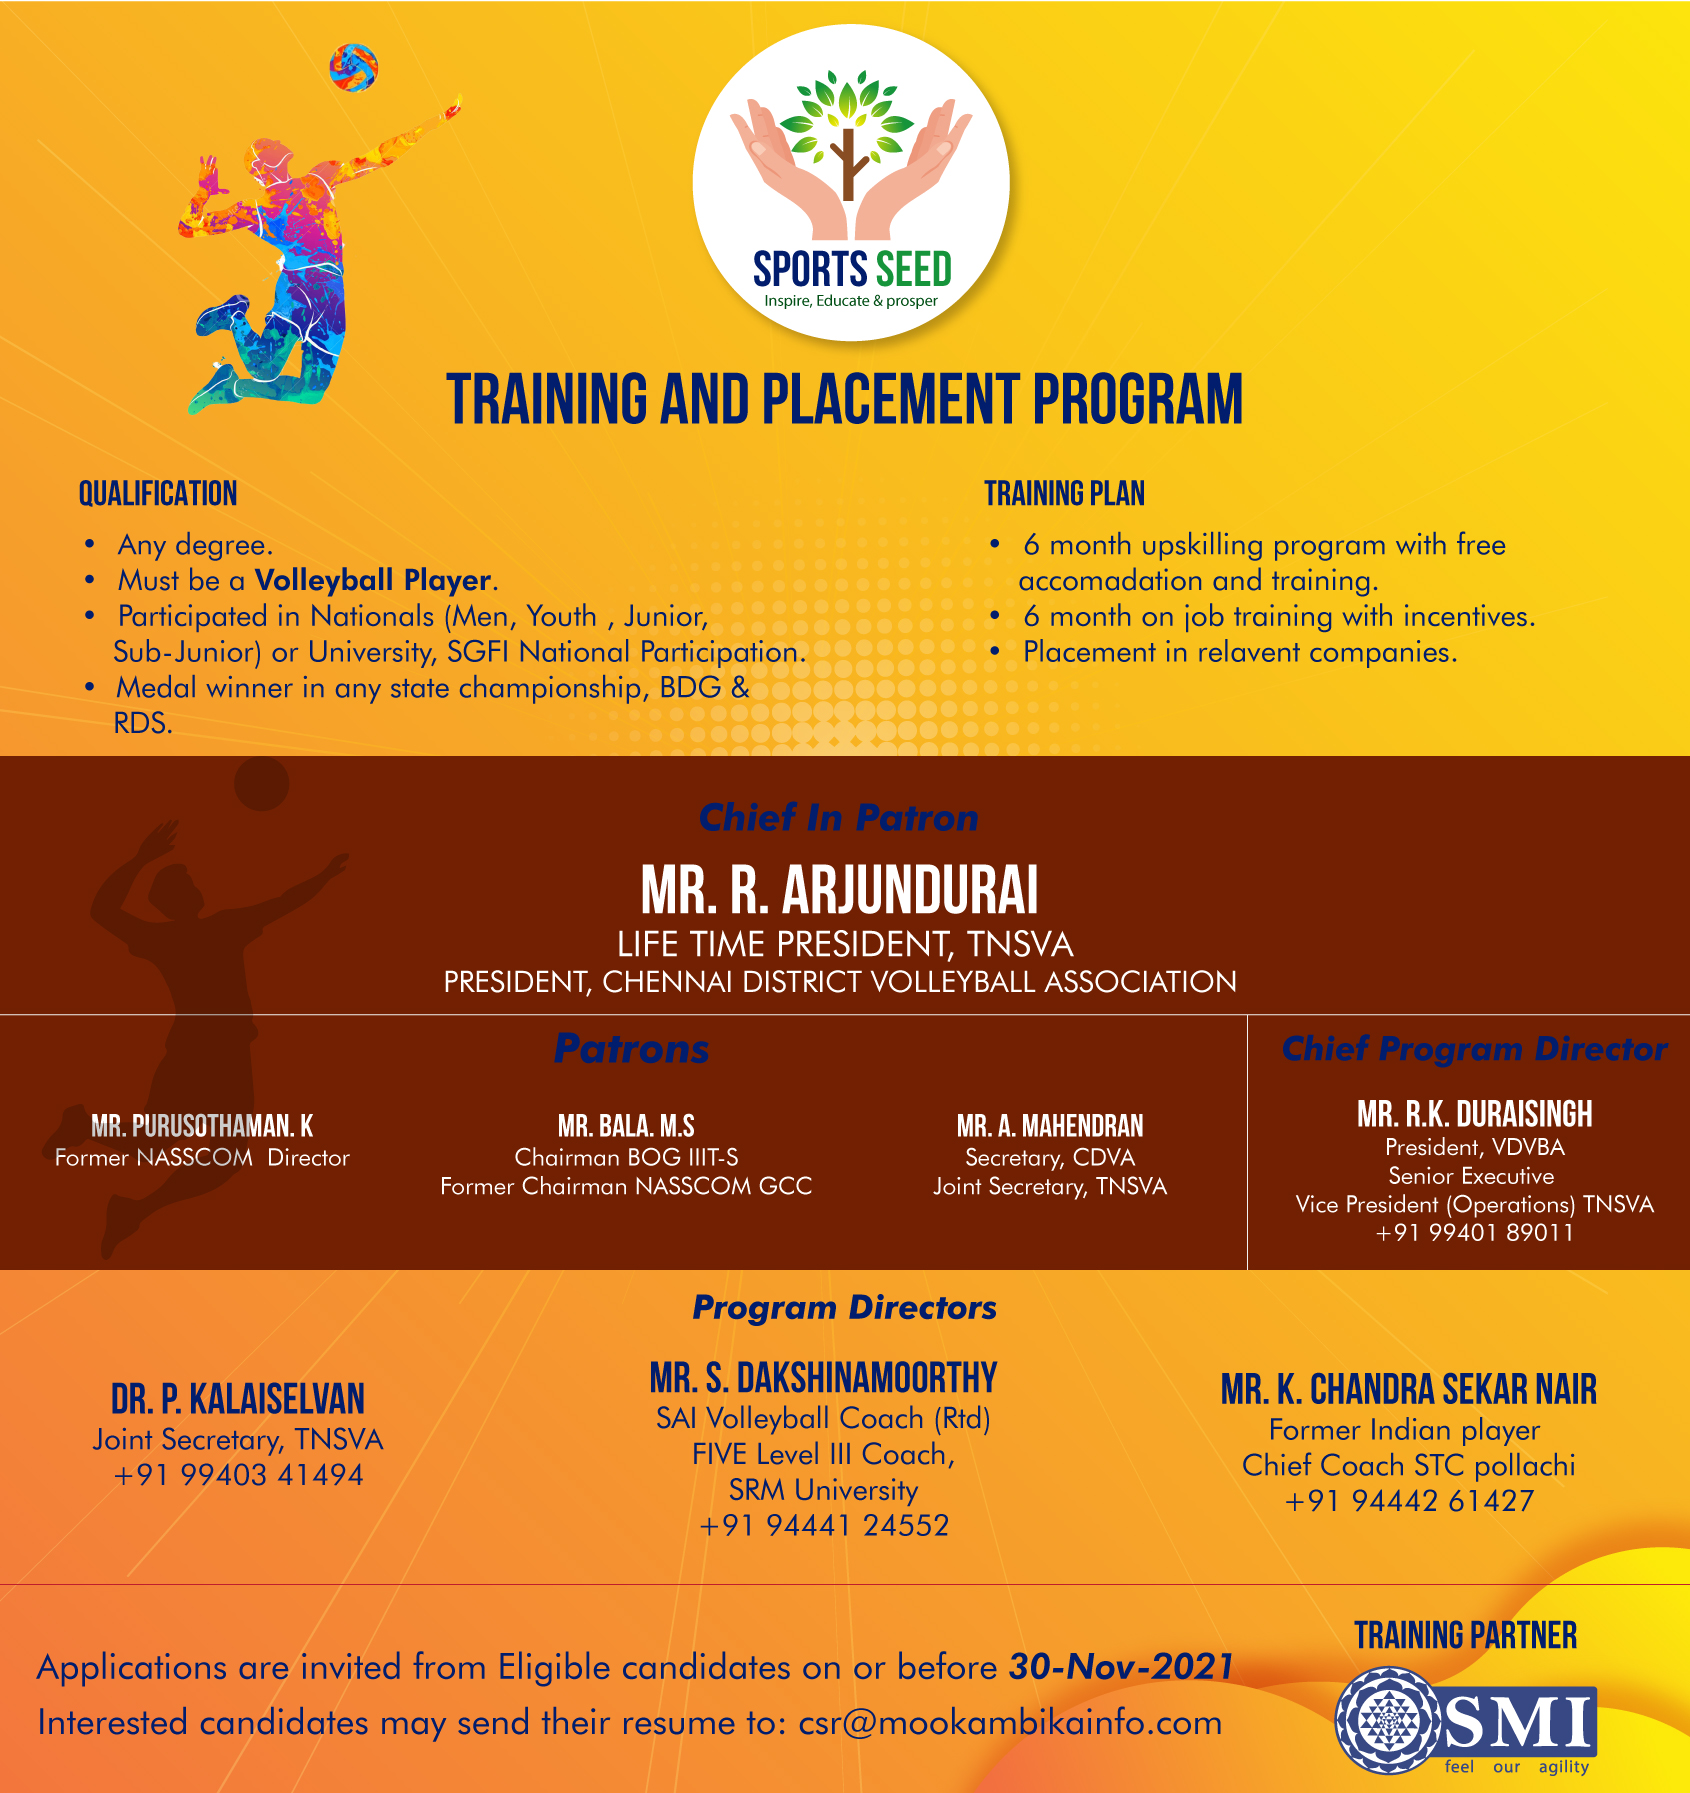 Sports Seed Training and Placement Program